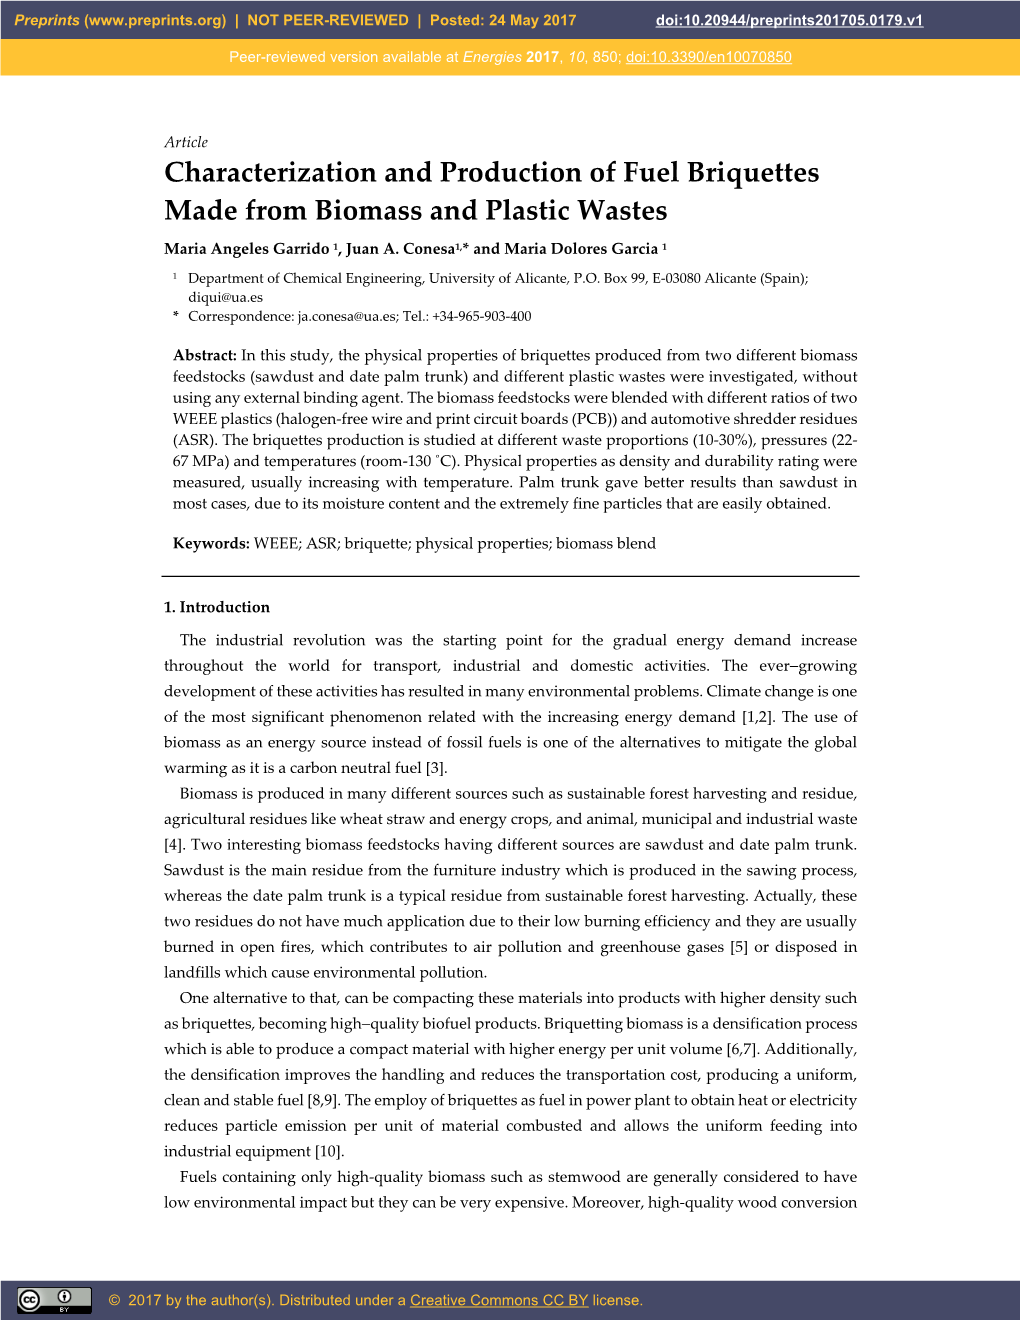 Characterization and Production of Fuel Briquettes Made from Biomass and Plastic Wastes Maria Angeles Garrido 1, Juan A